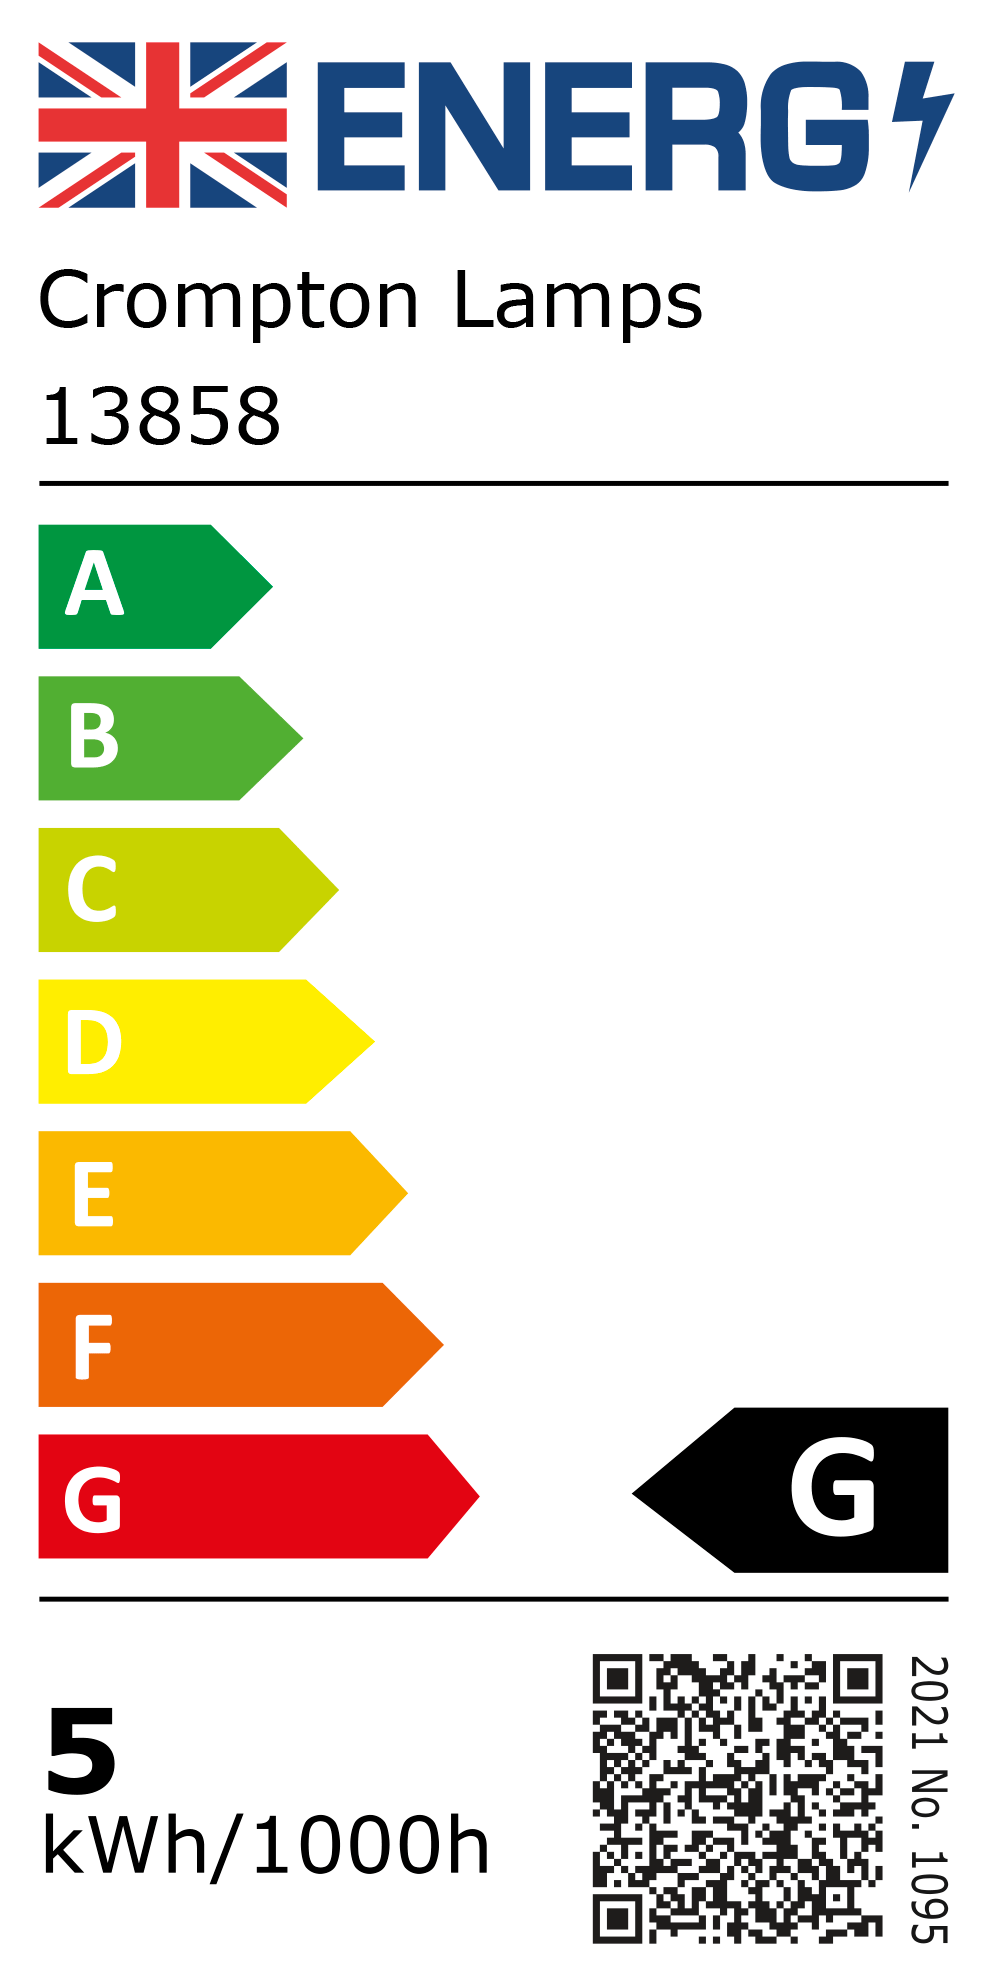 New 2021 Energy Rating Label: Stock Code 13858